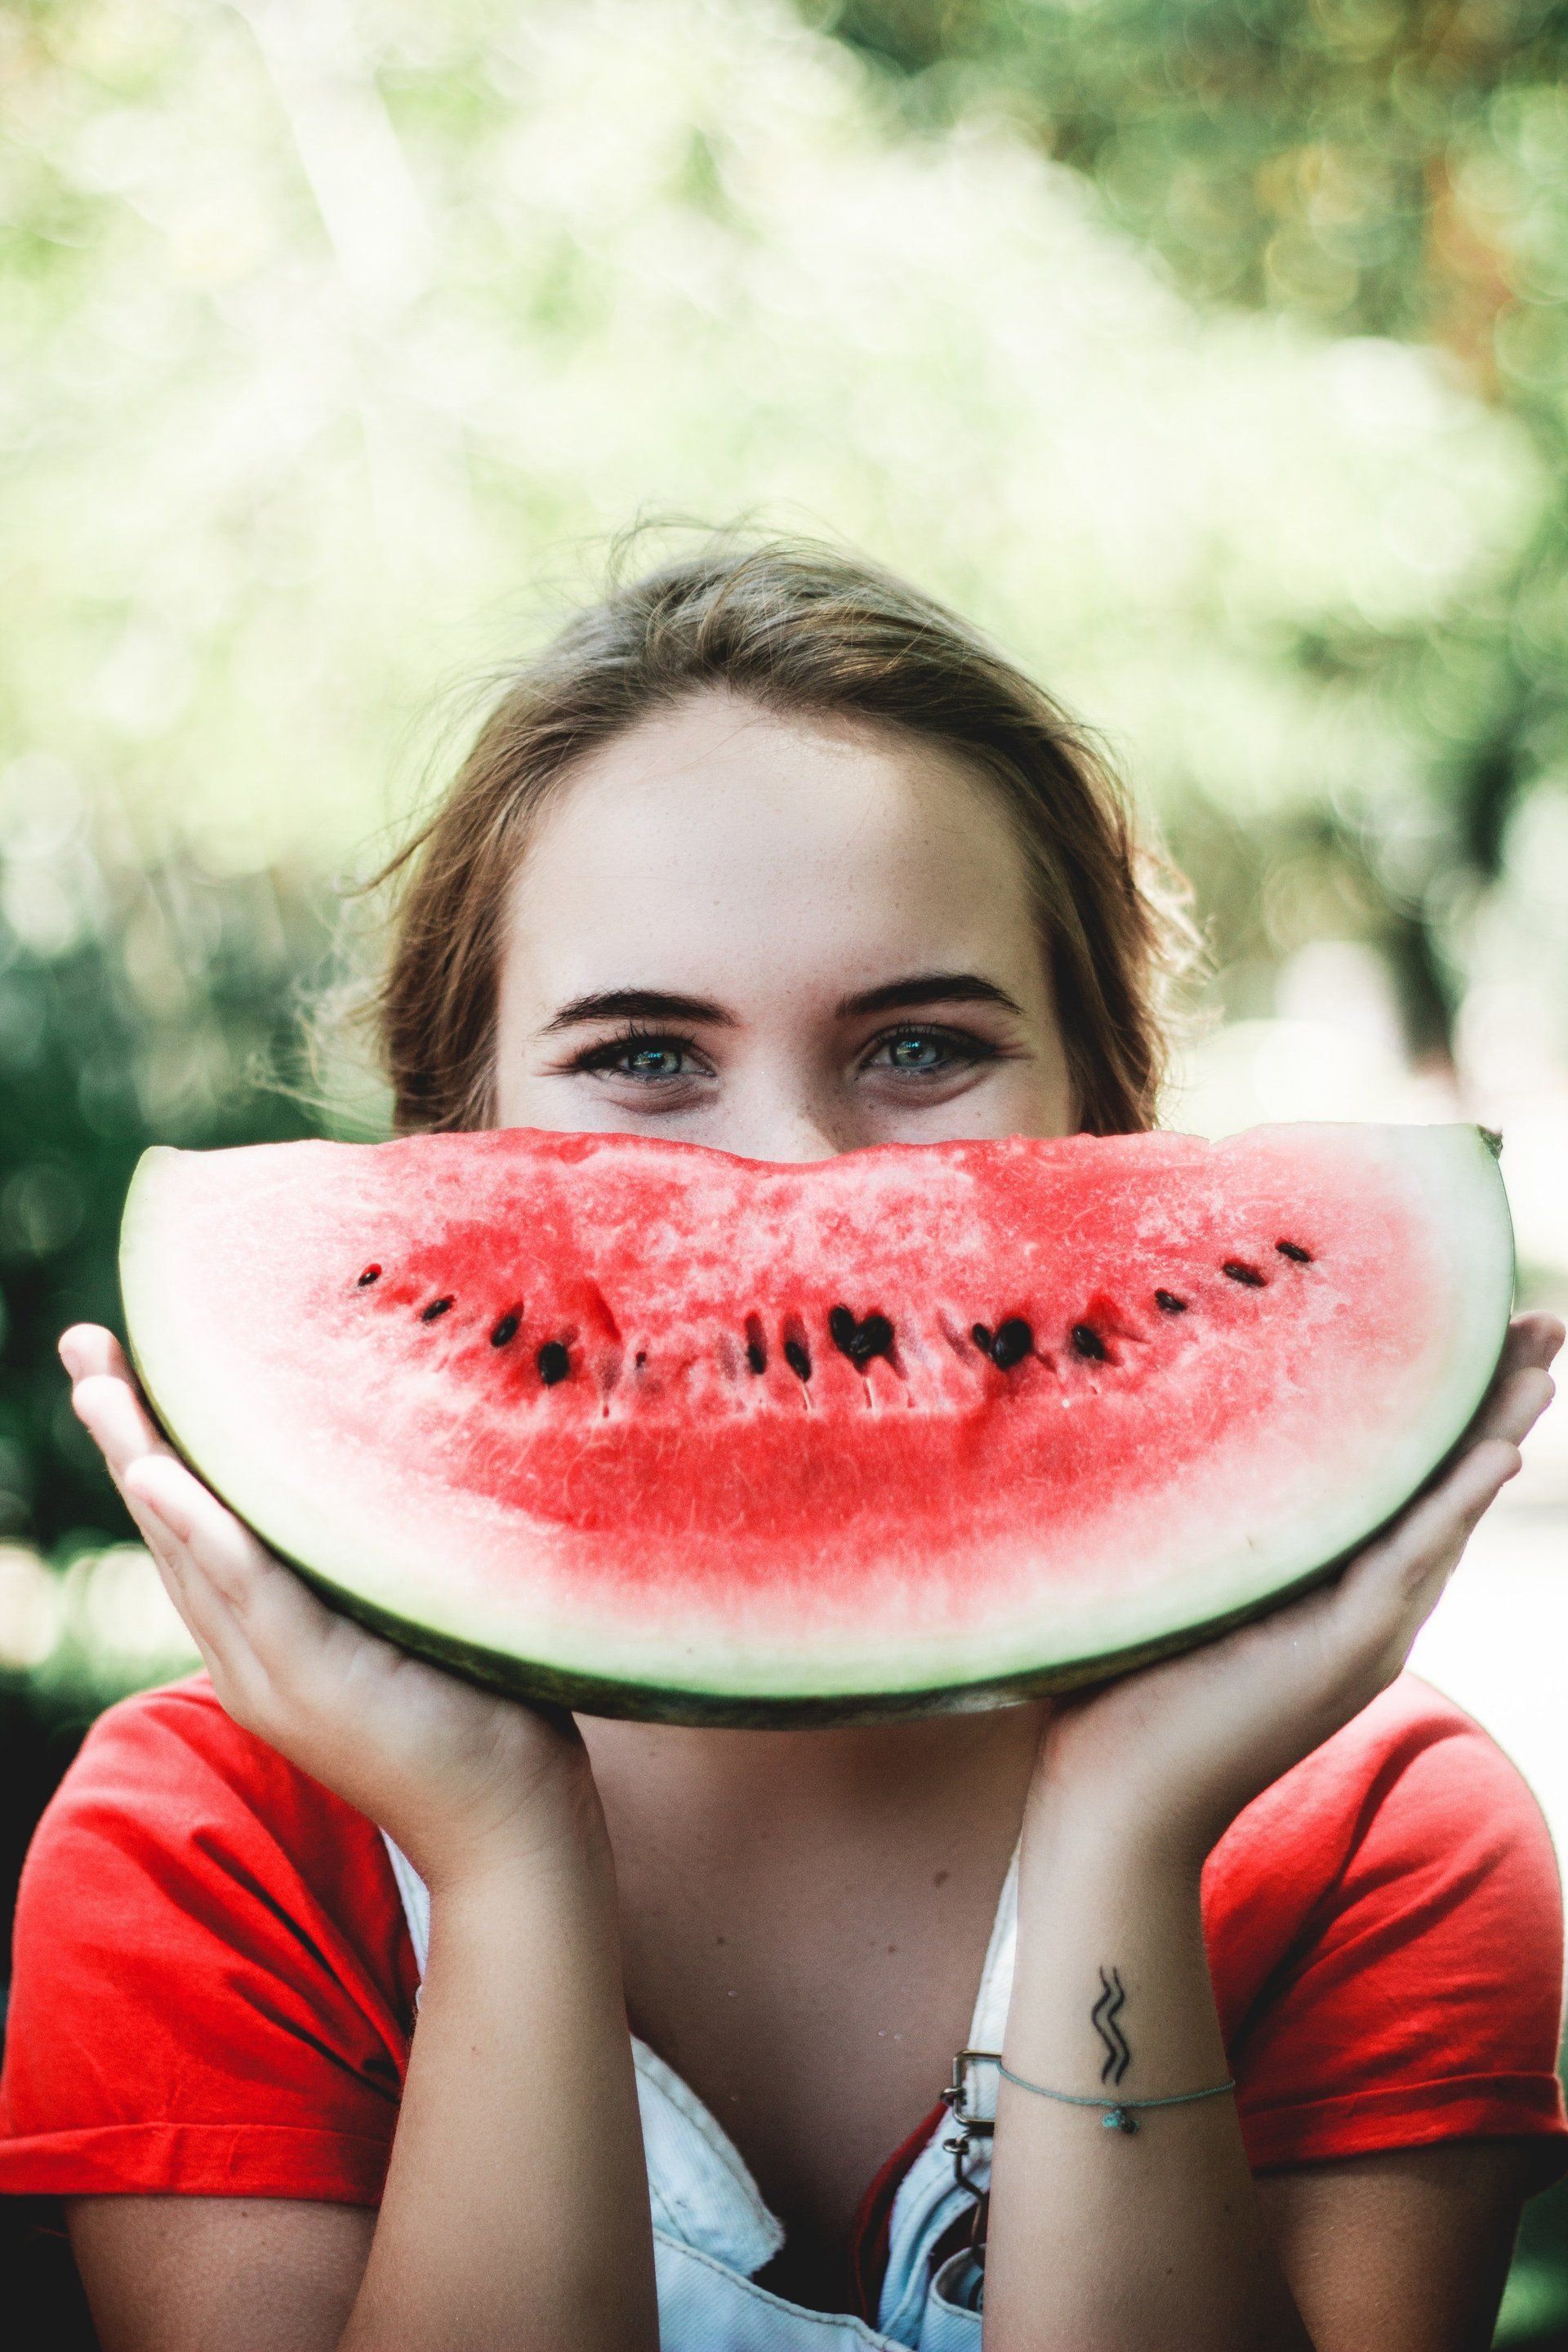 thrivyest watermelon image example - plans to eat healthy